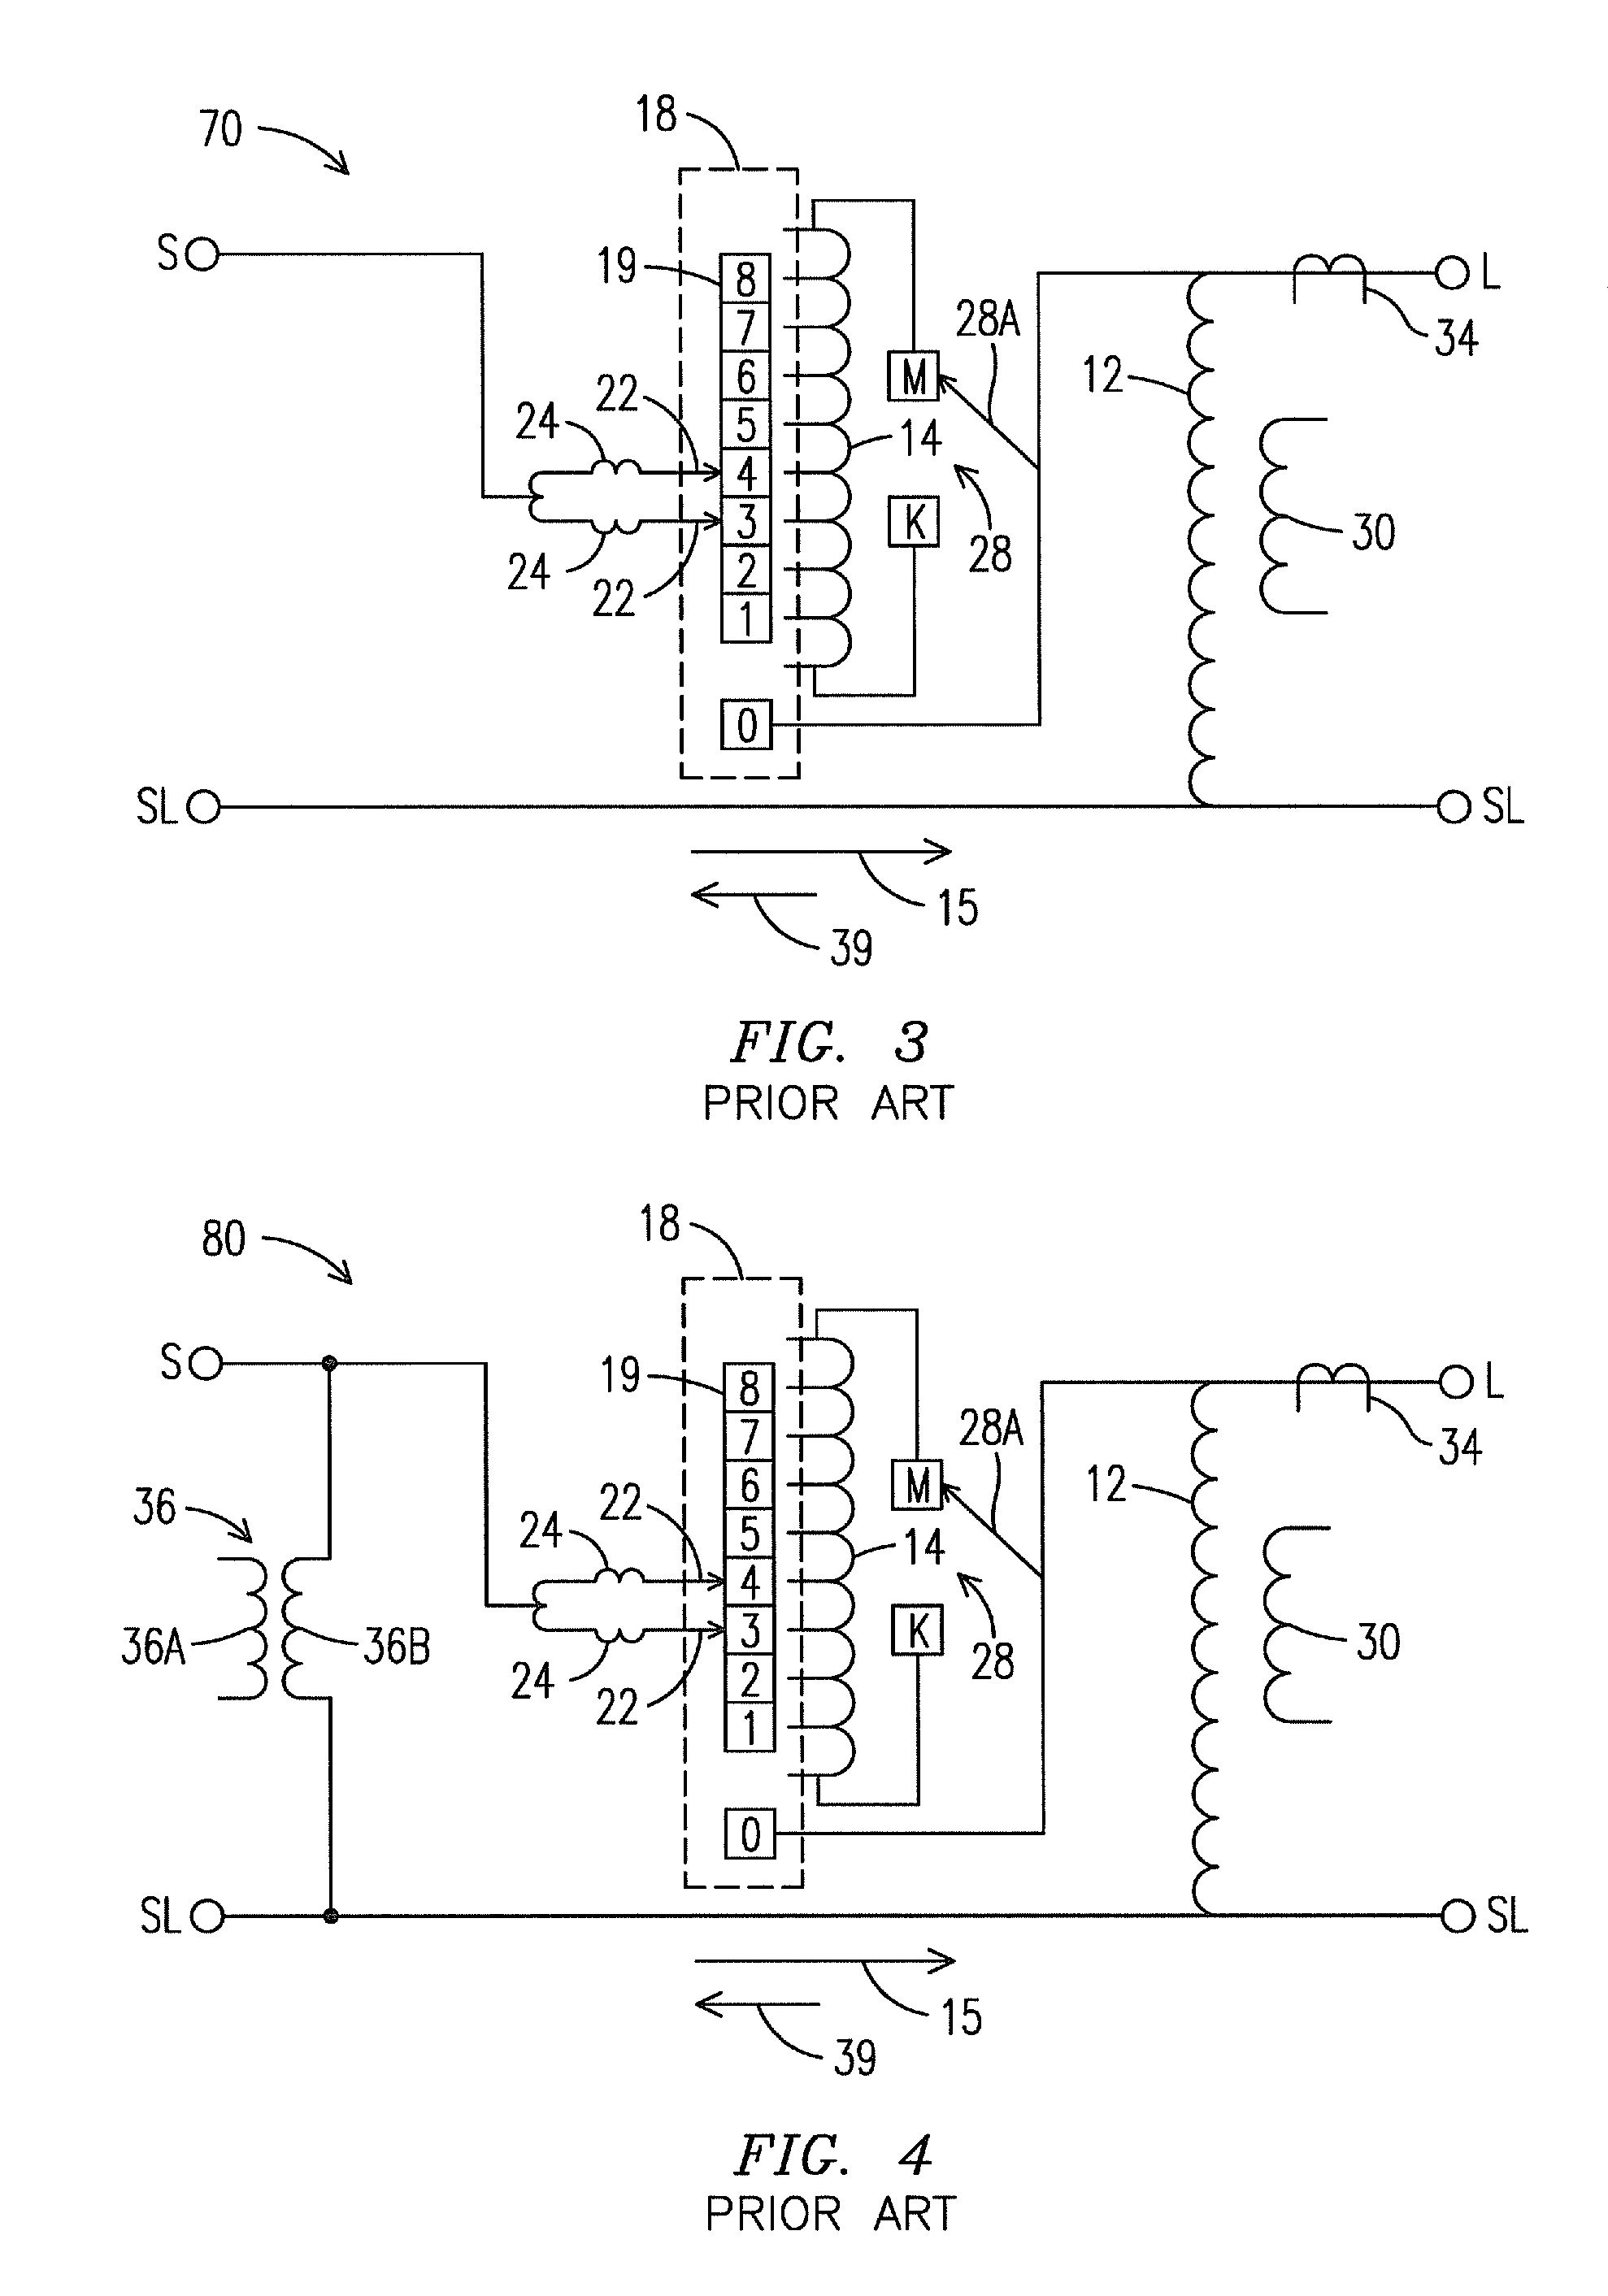 Apparatus and method for generating a metering voltage output for a voltage regulator using a microprocessor